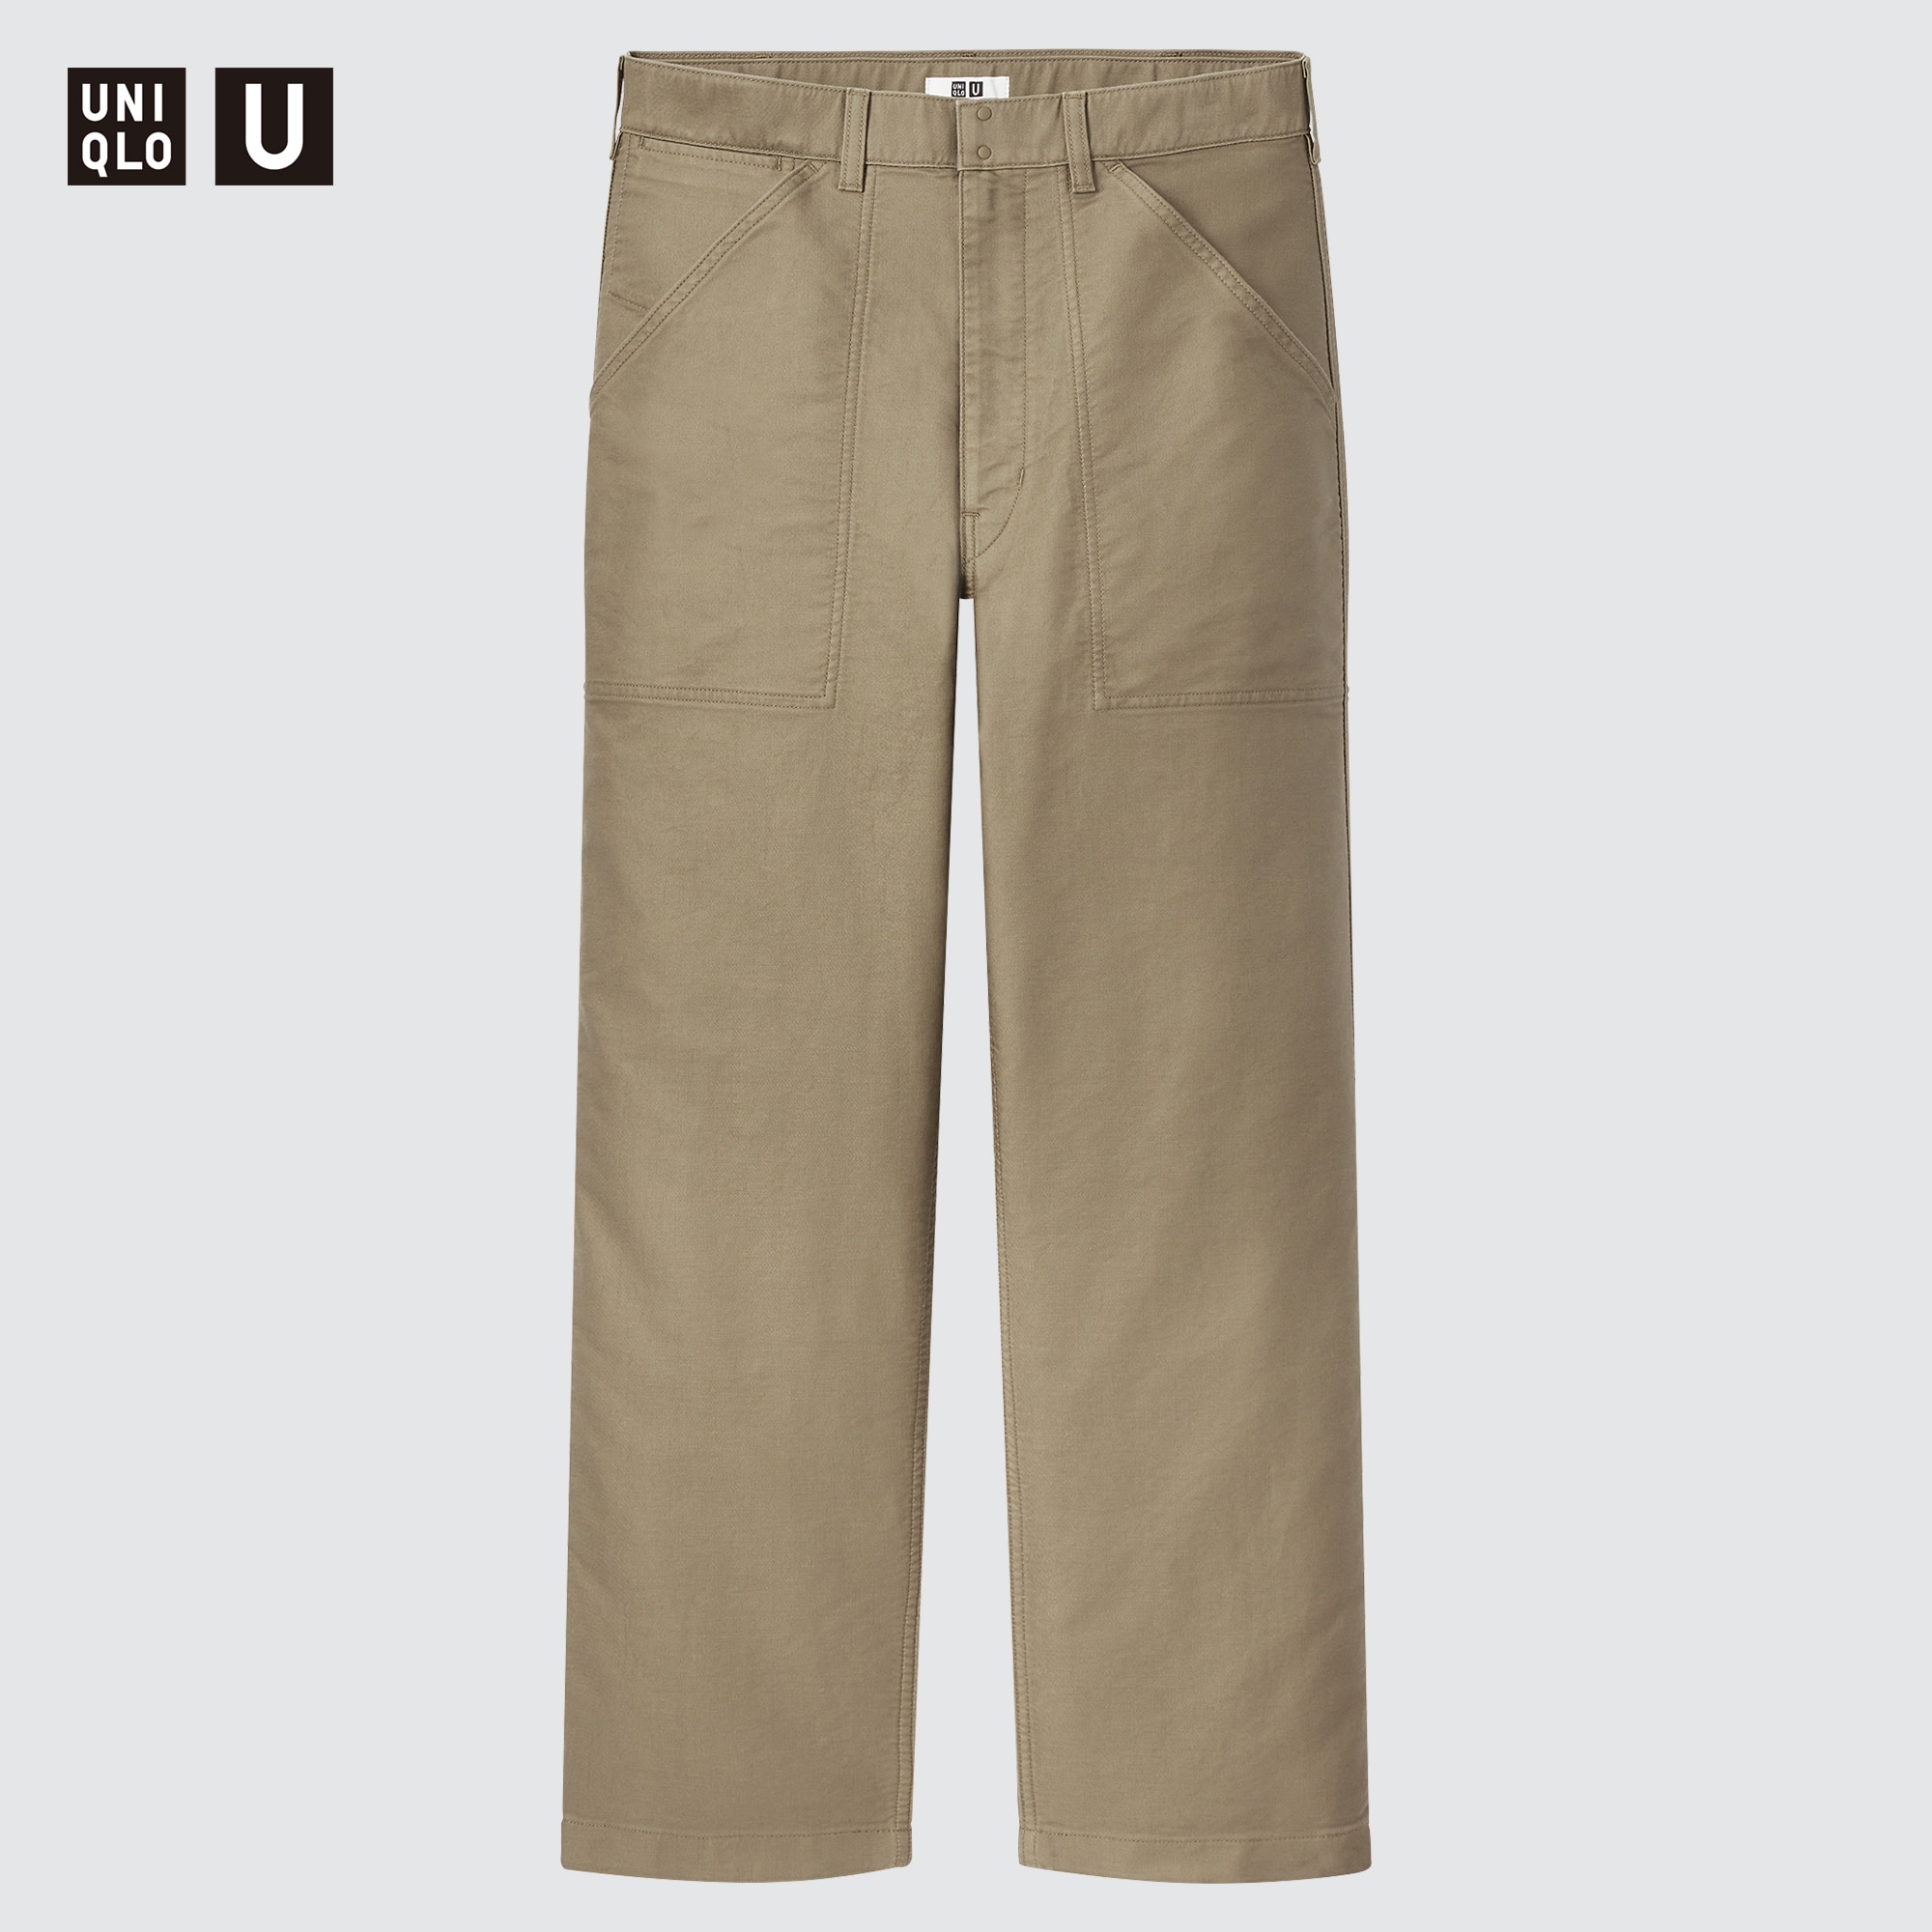 Reviews for U Wide-Fit Work Pants